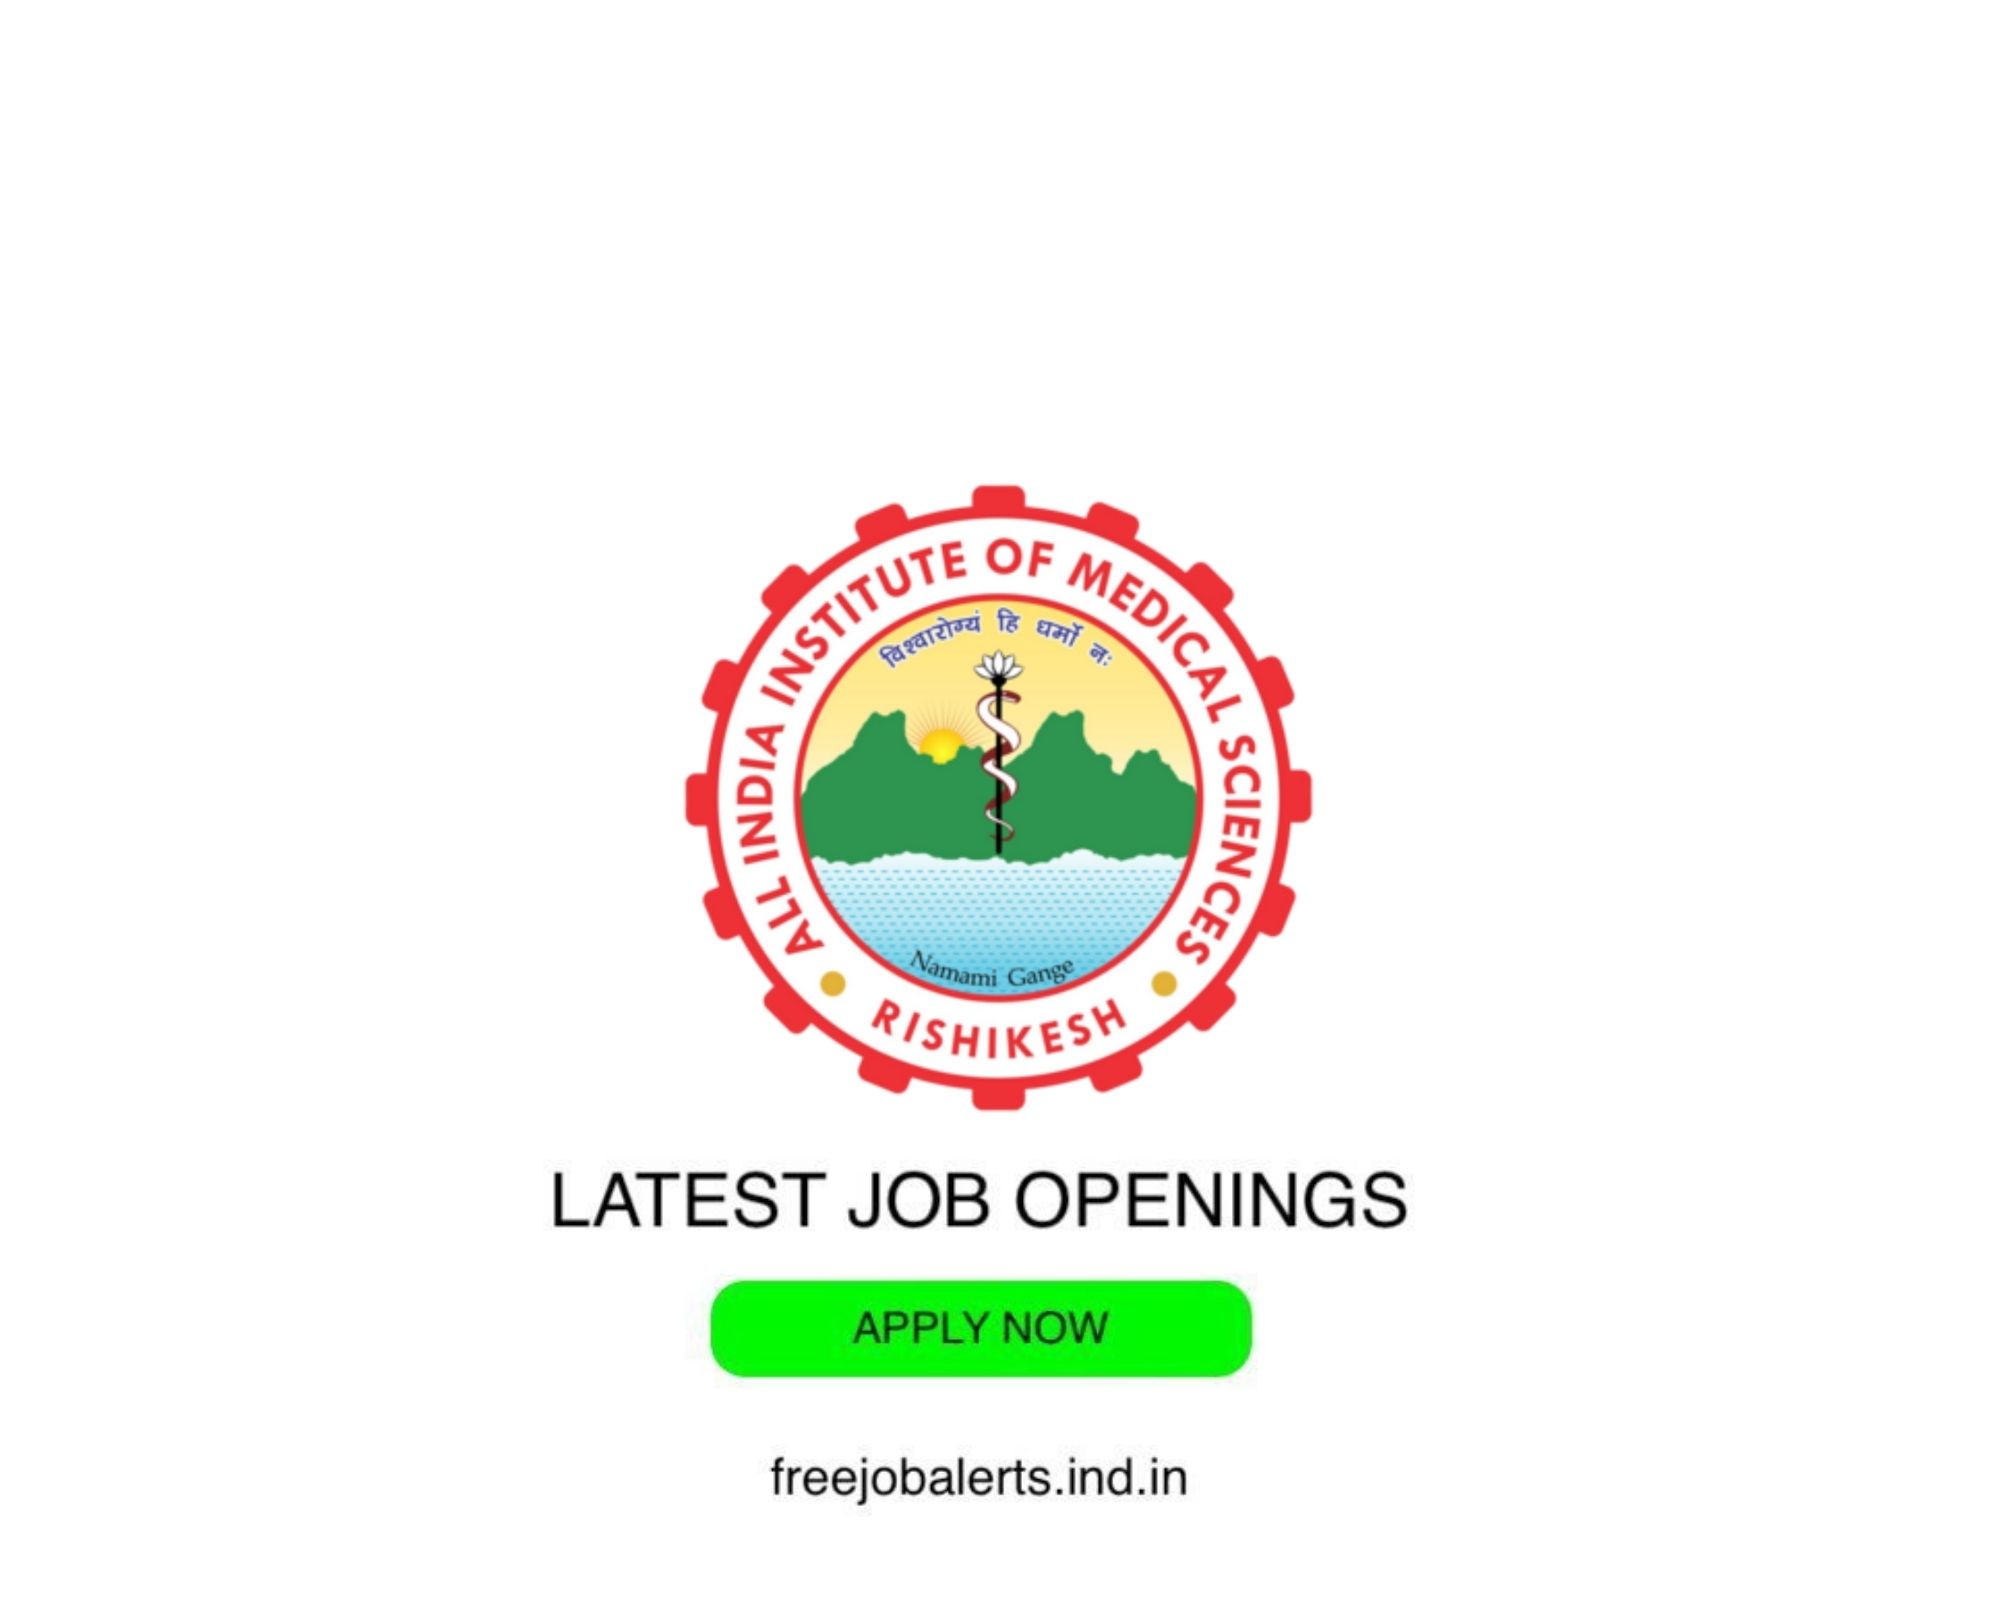 AIIMS Rishikesh- All India Institute of Medical Sciences- Latest Govt job openings - Free job alerts, Indian Govt Jobs